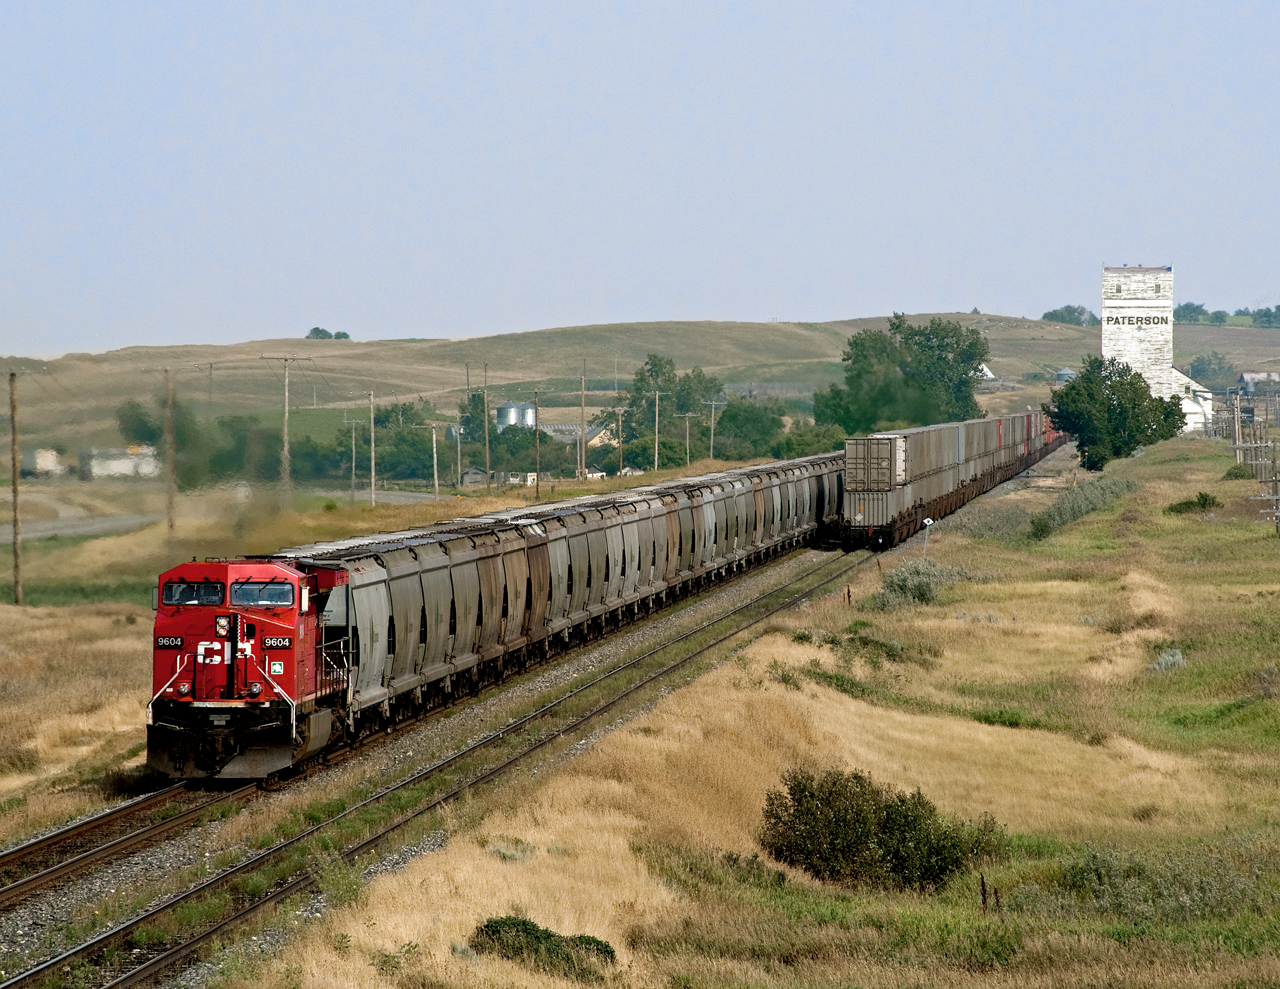 A westbound potash clears the west end of Parkbeg siding while an eastbound container train sits in the hole.